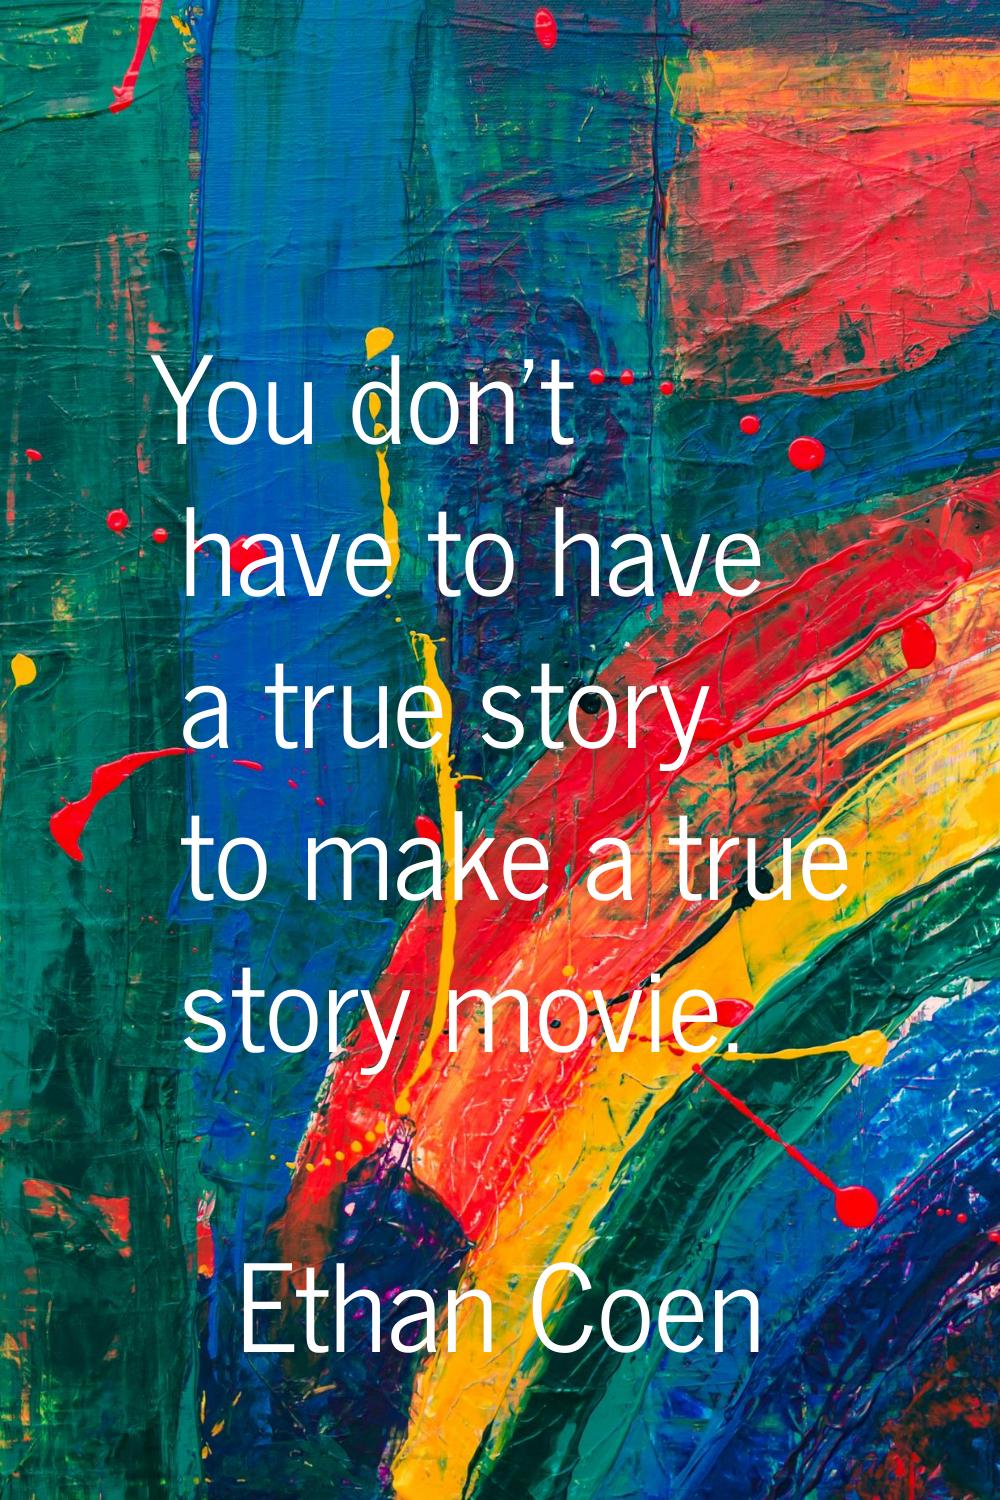 You don't have to have a true story to make a true story movie.